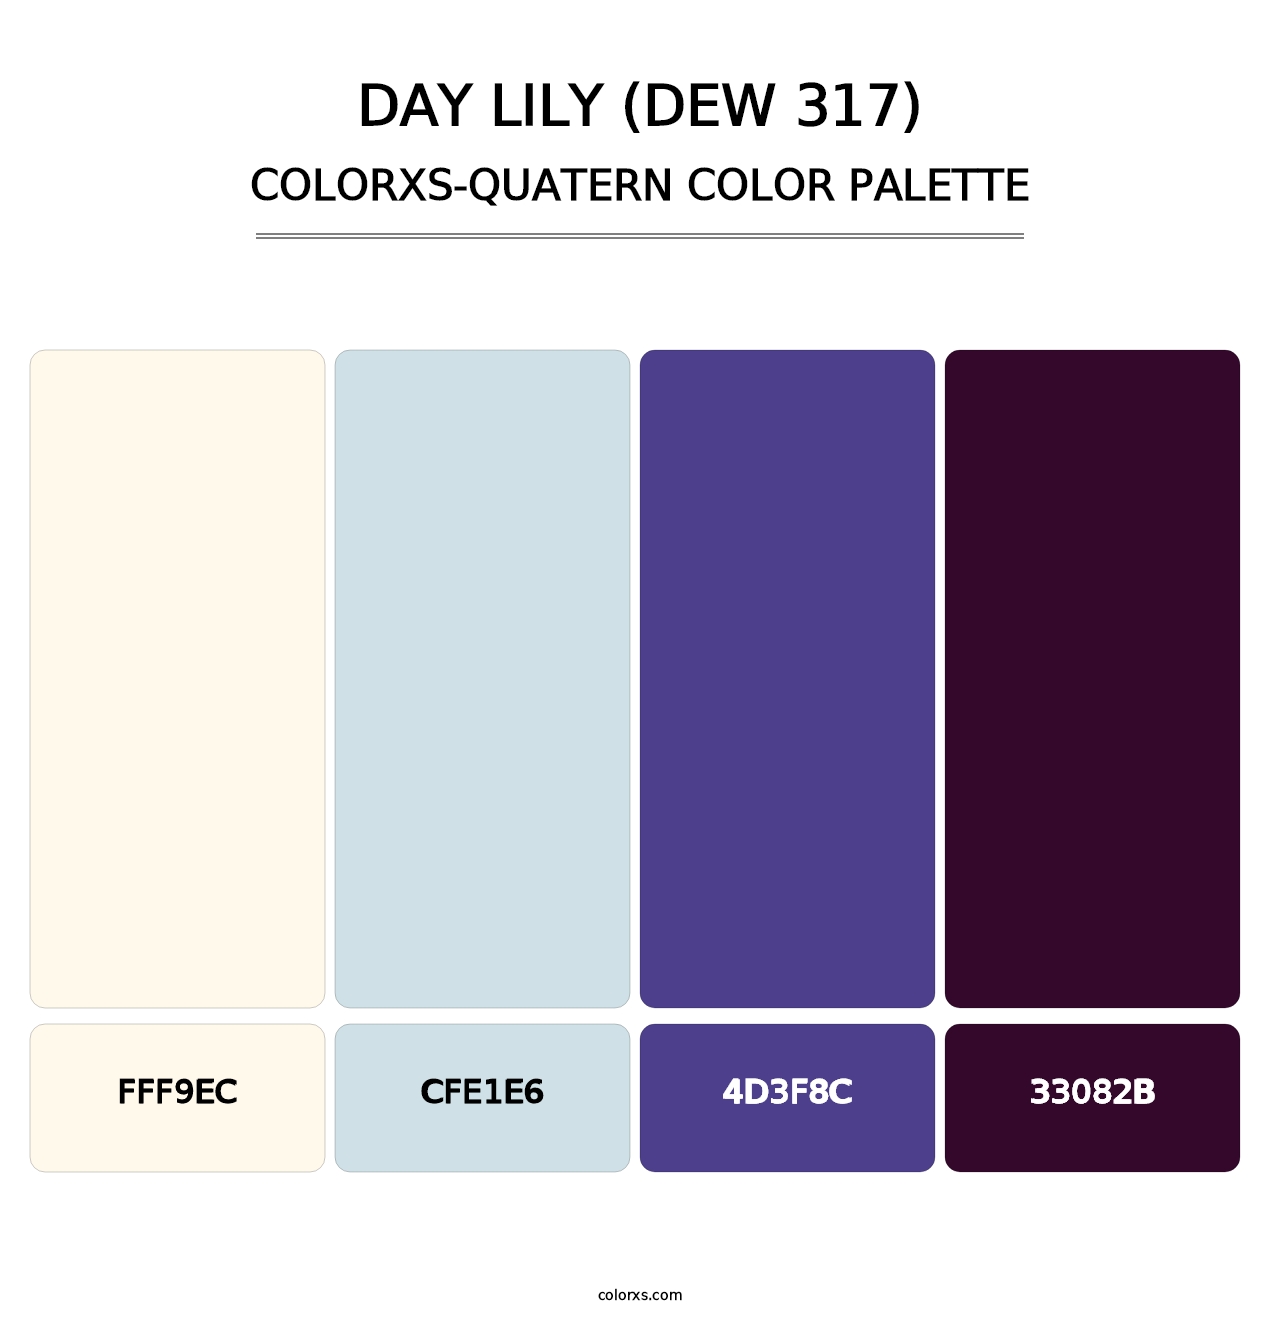 Day Lily (DEW 317) - Colorxs Quatern Palette